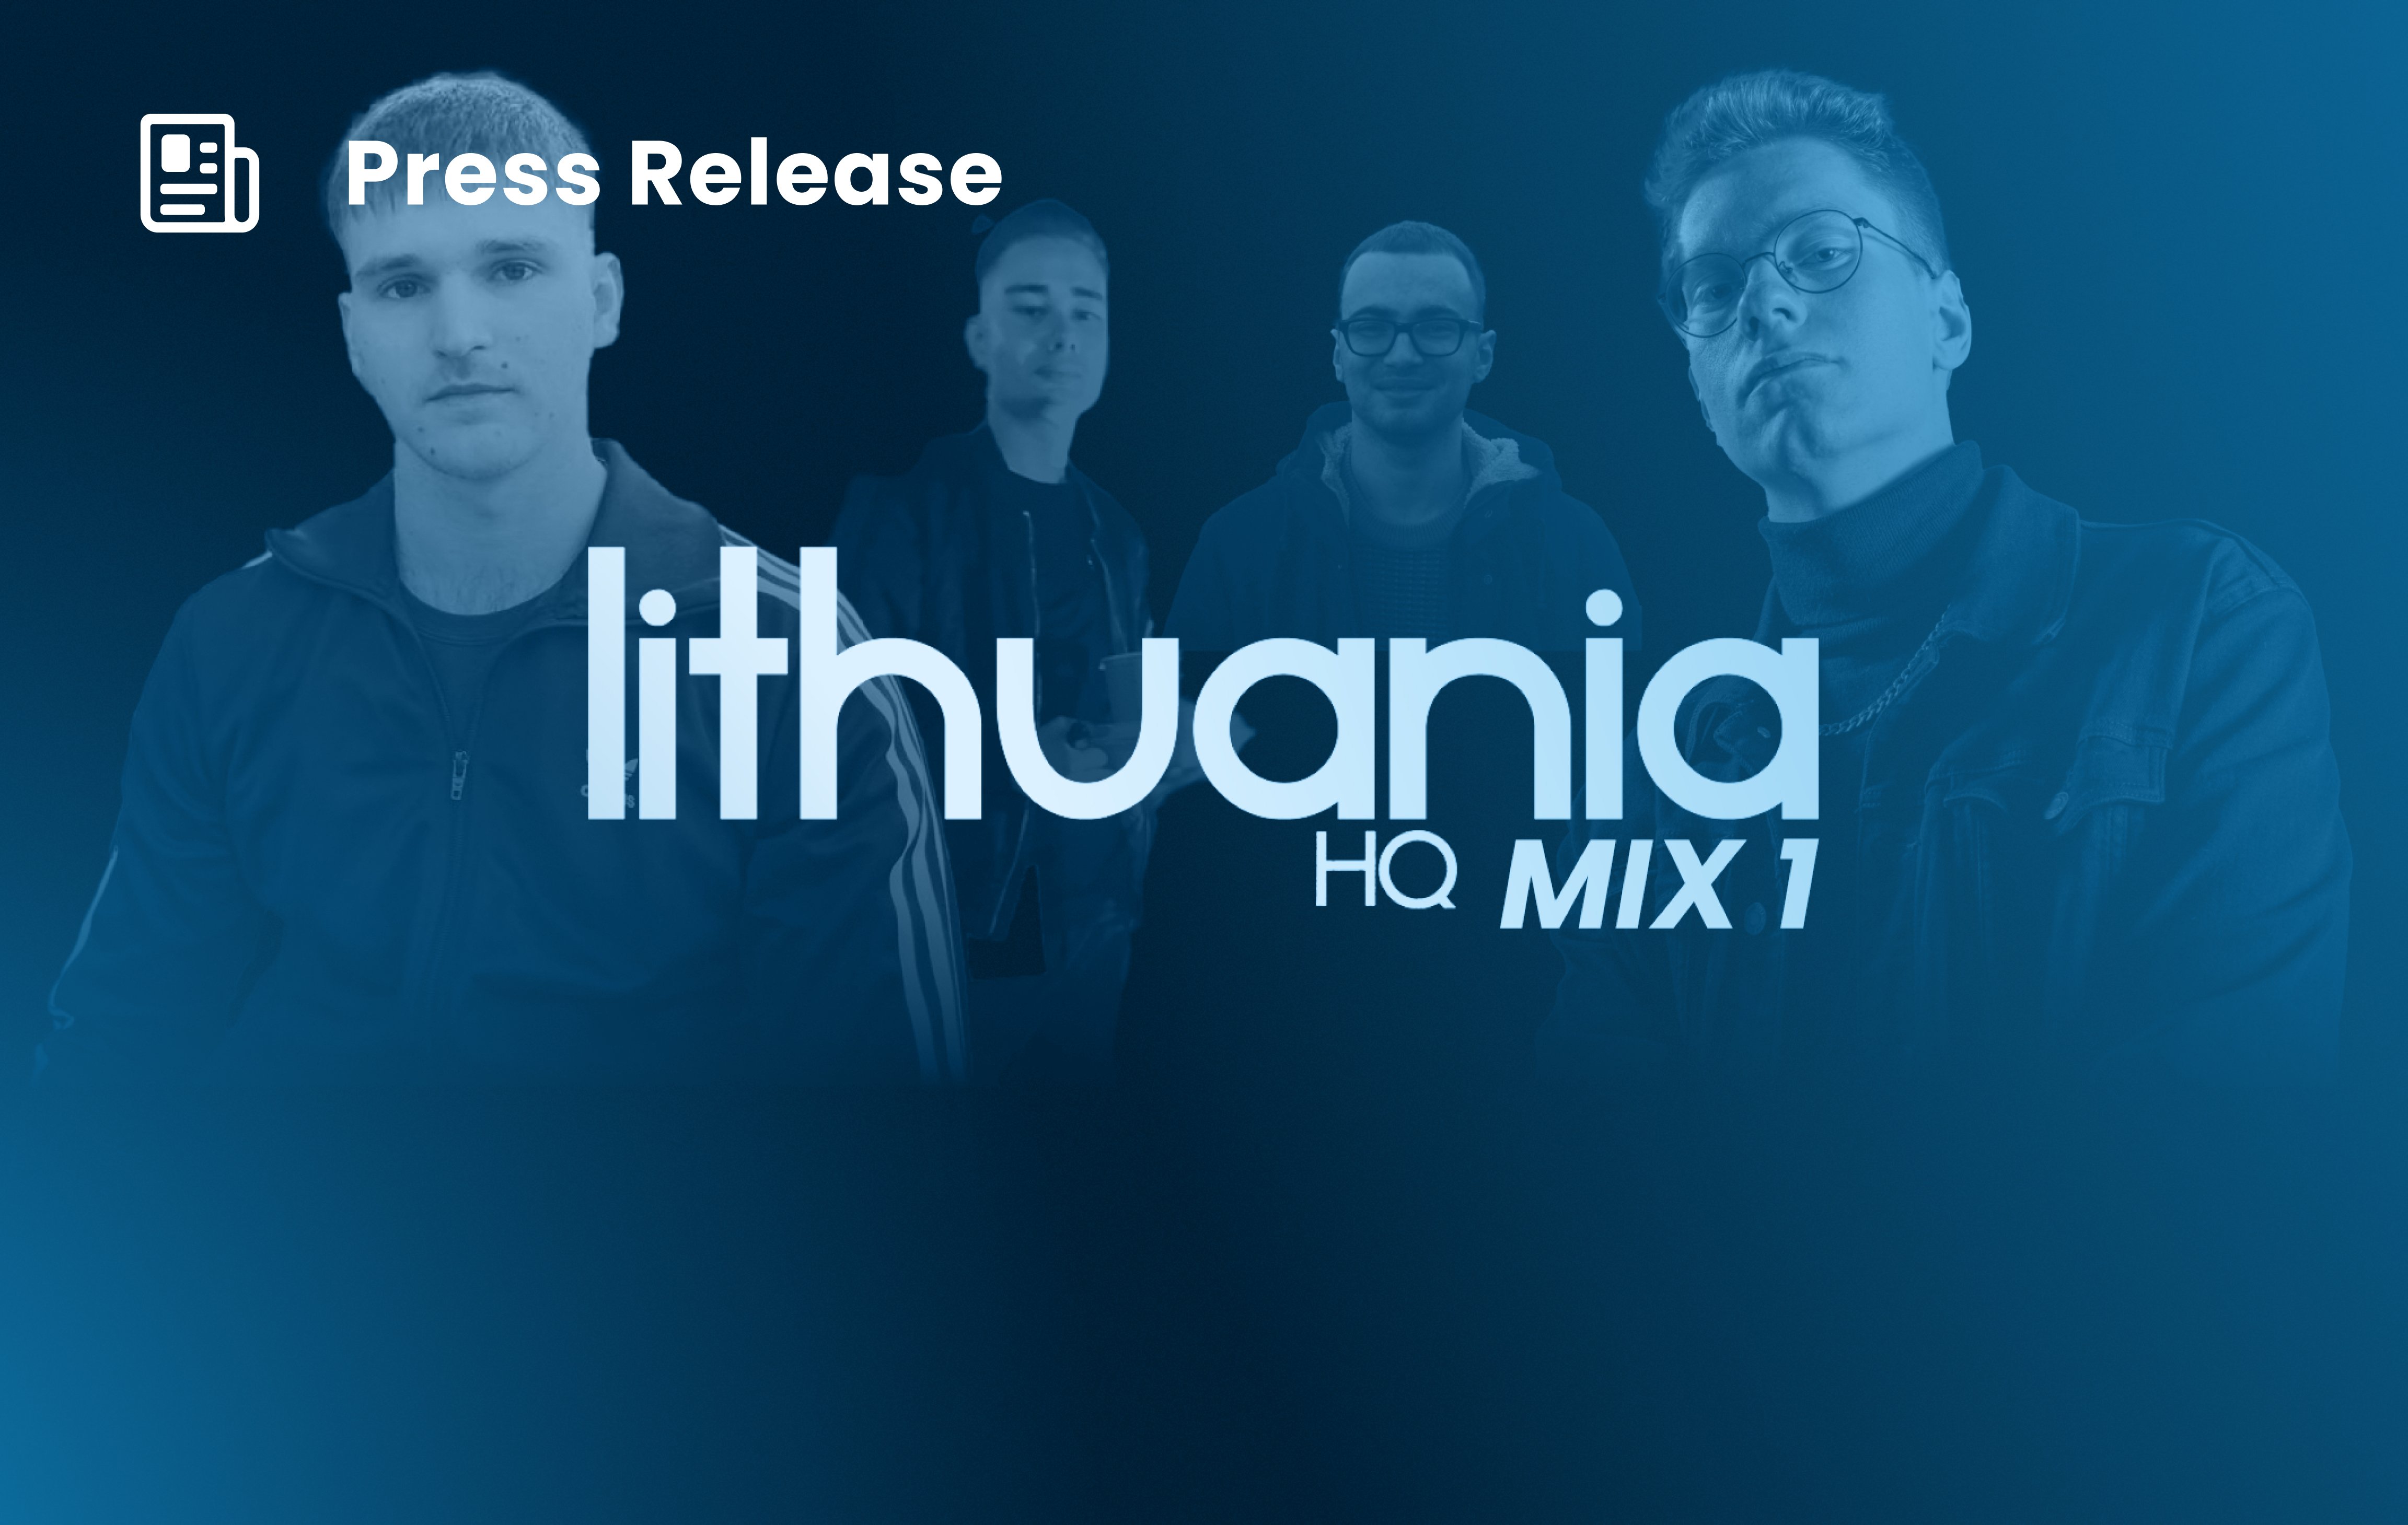 ANote and Lithuania HQ announce mixed catalogue